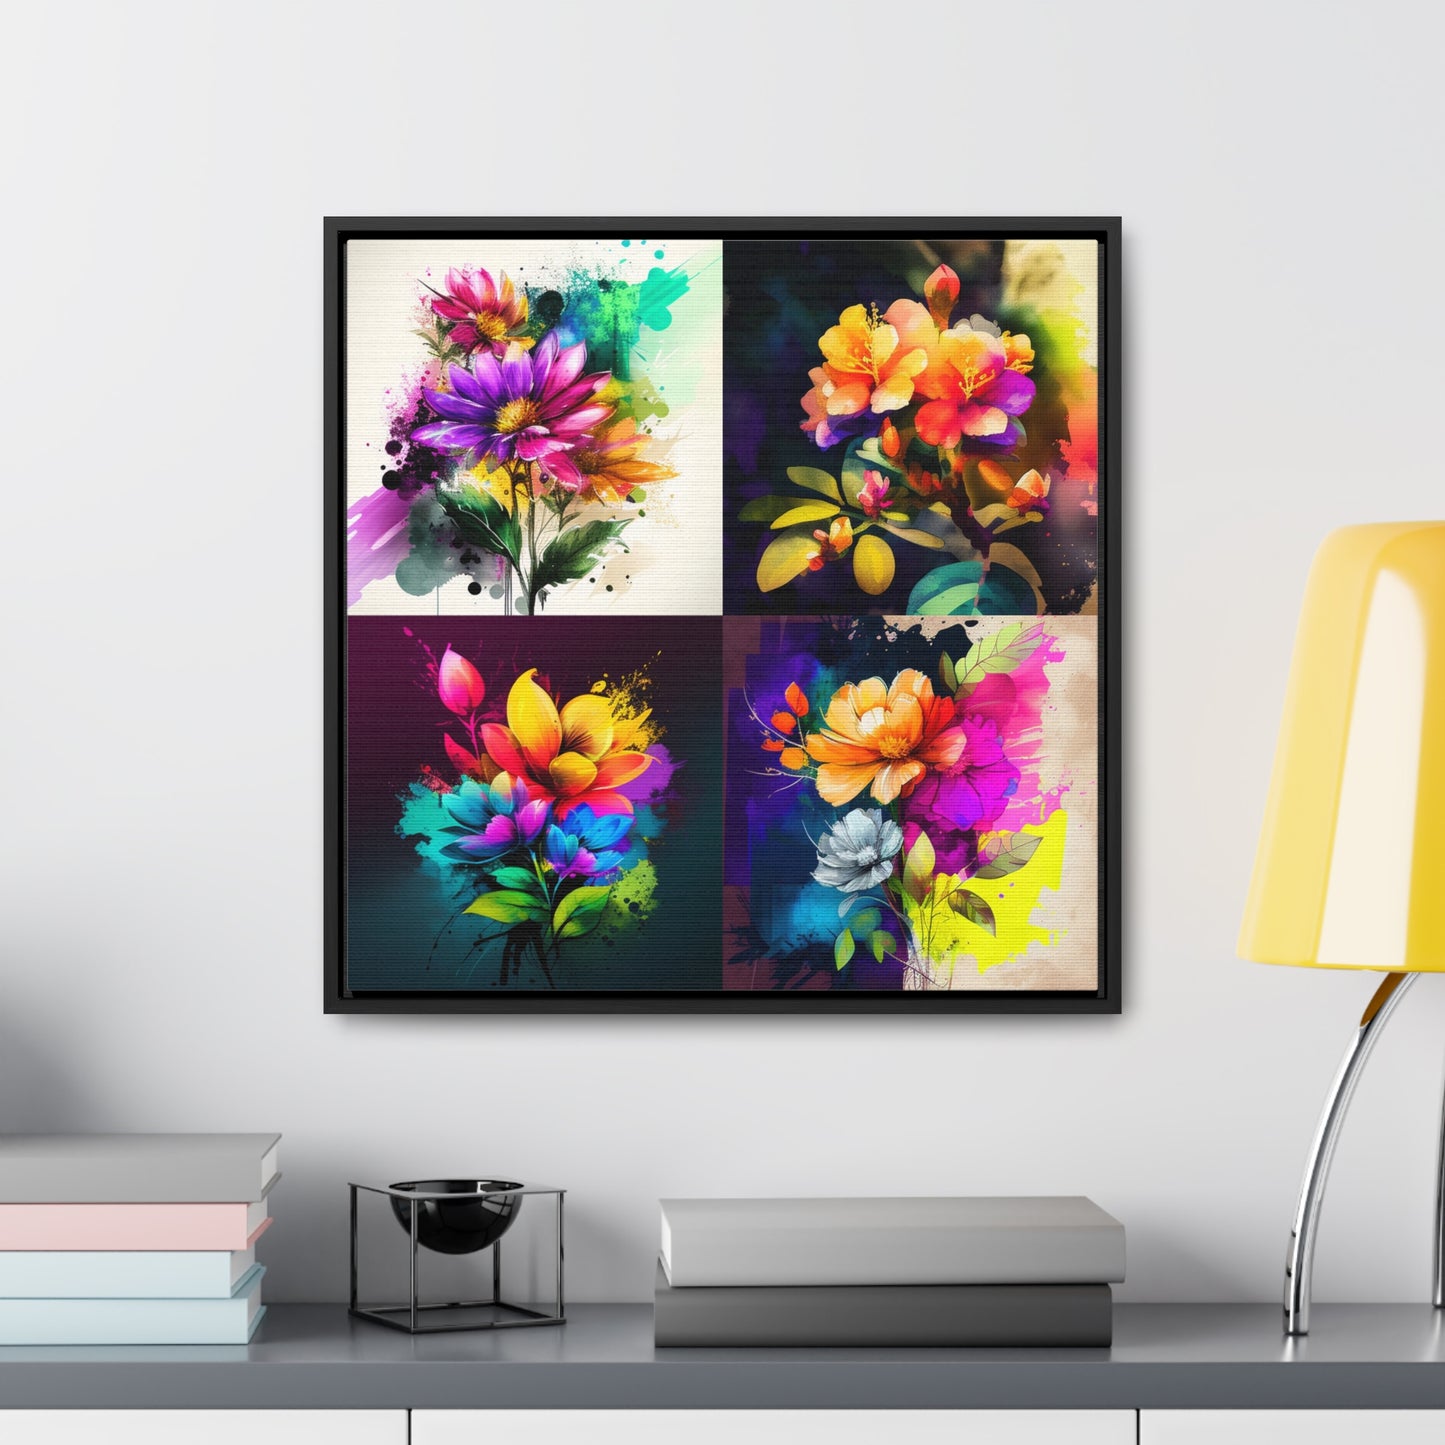 Gallery Canvas Wraps, Square Frame Bright Spring Flowers 5